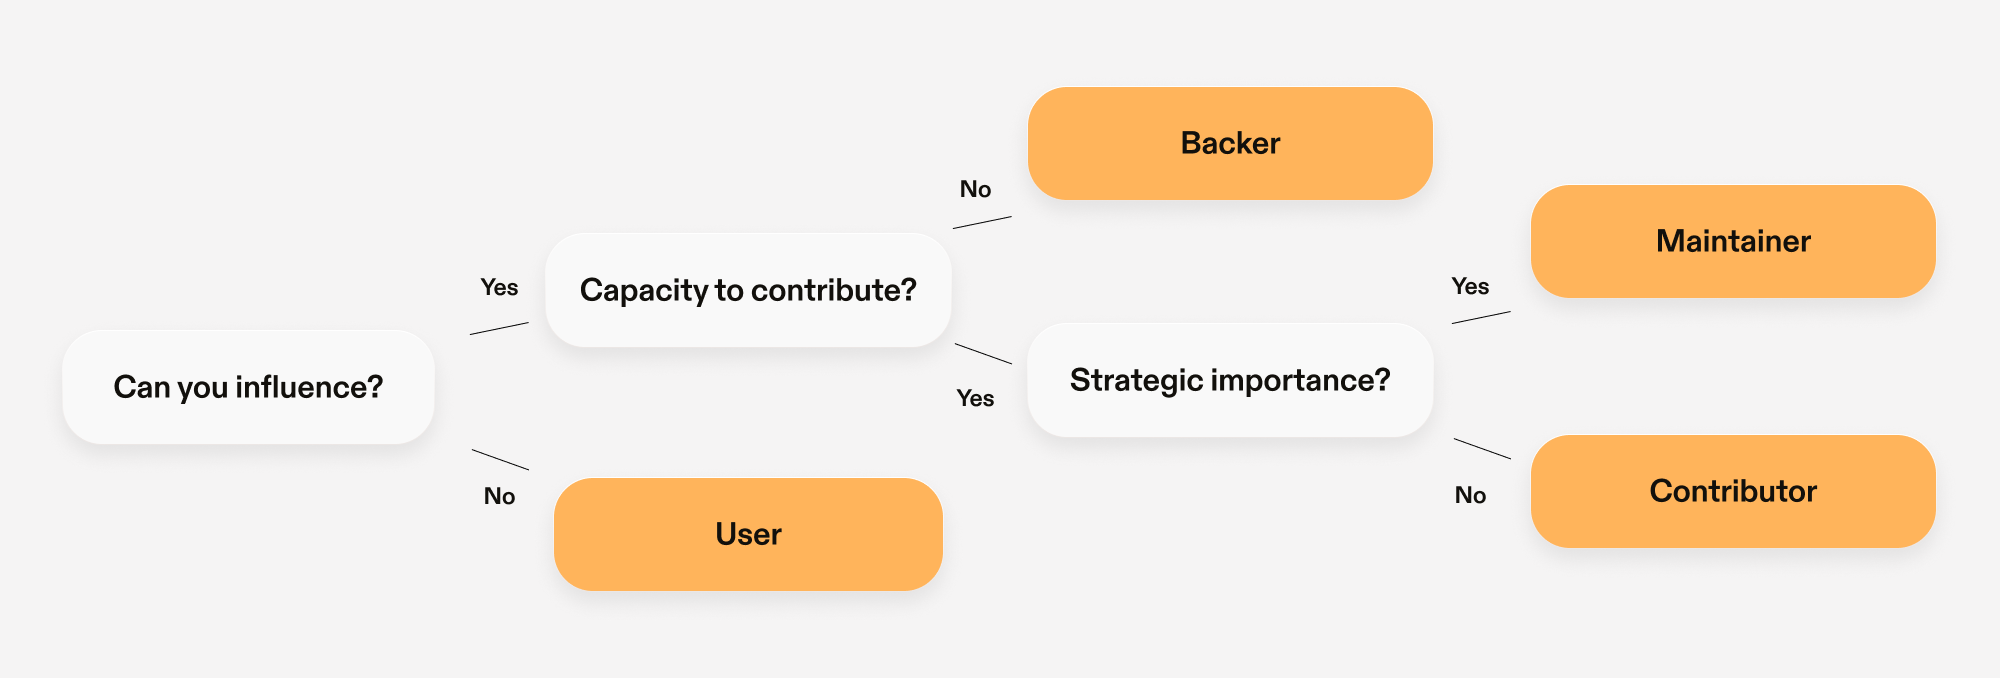 Open-source supply chain decision tree